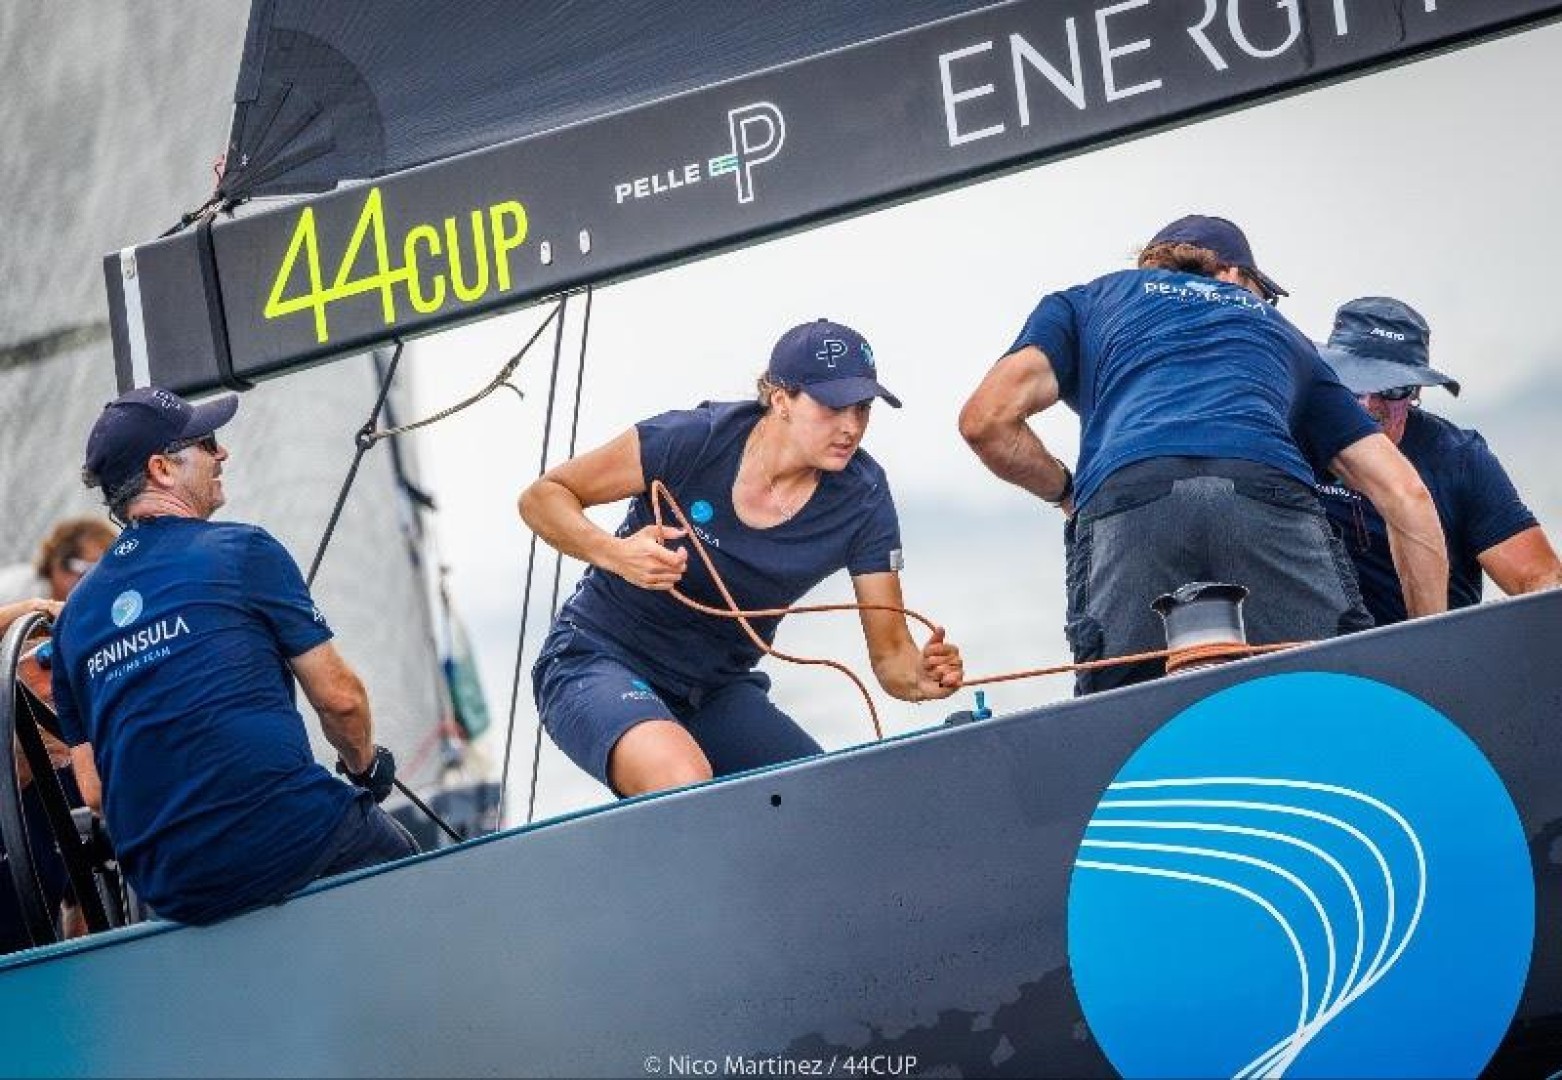 44Cup teams set sail with female crew